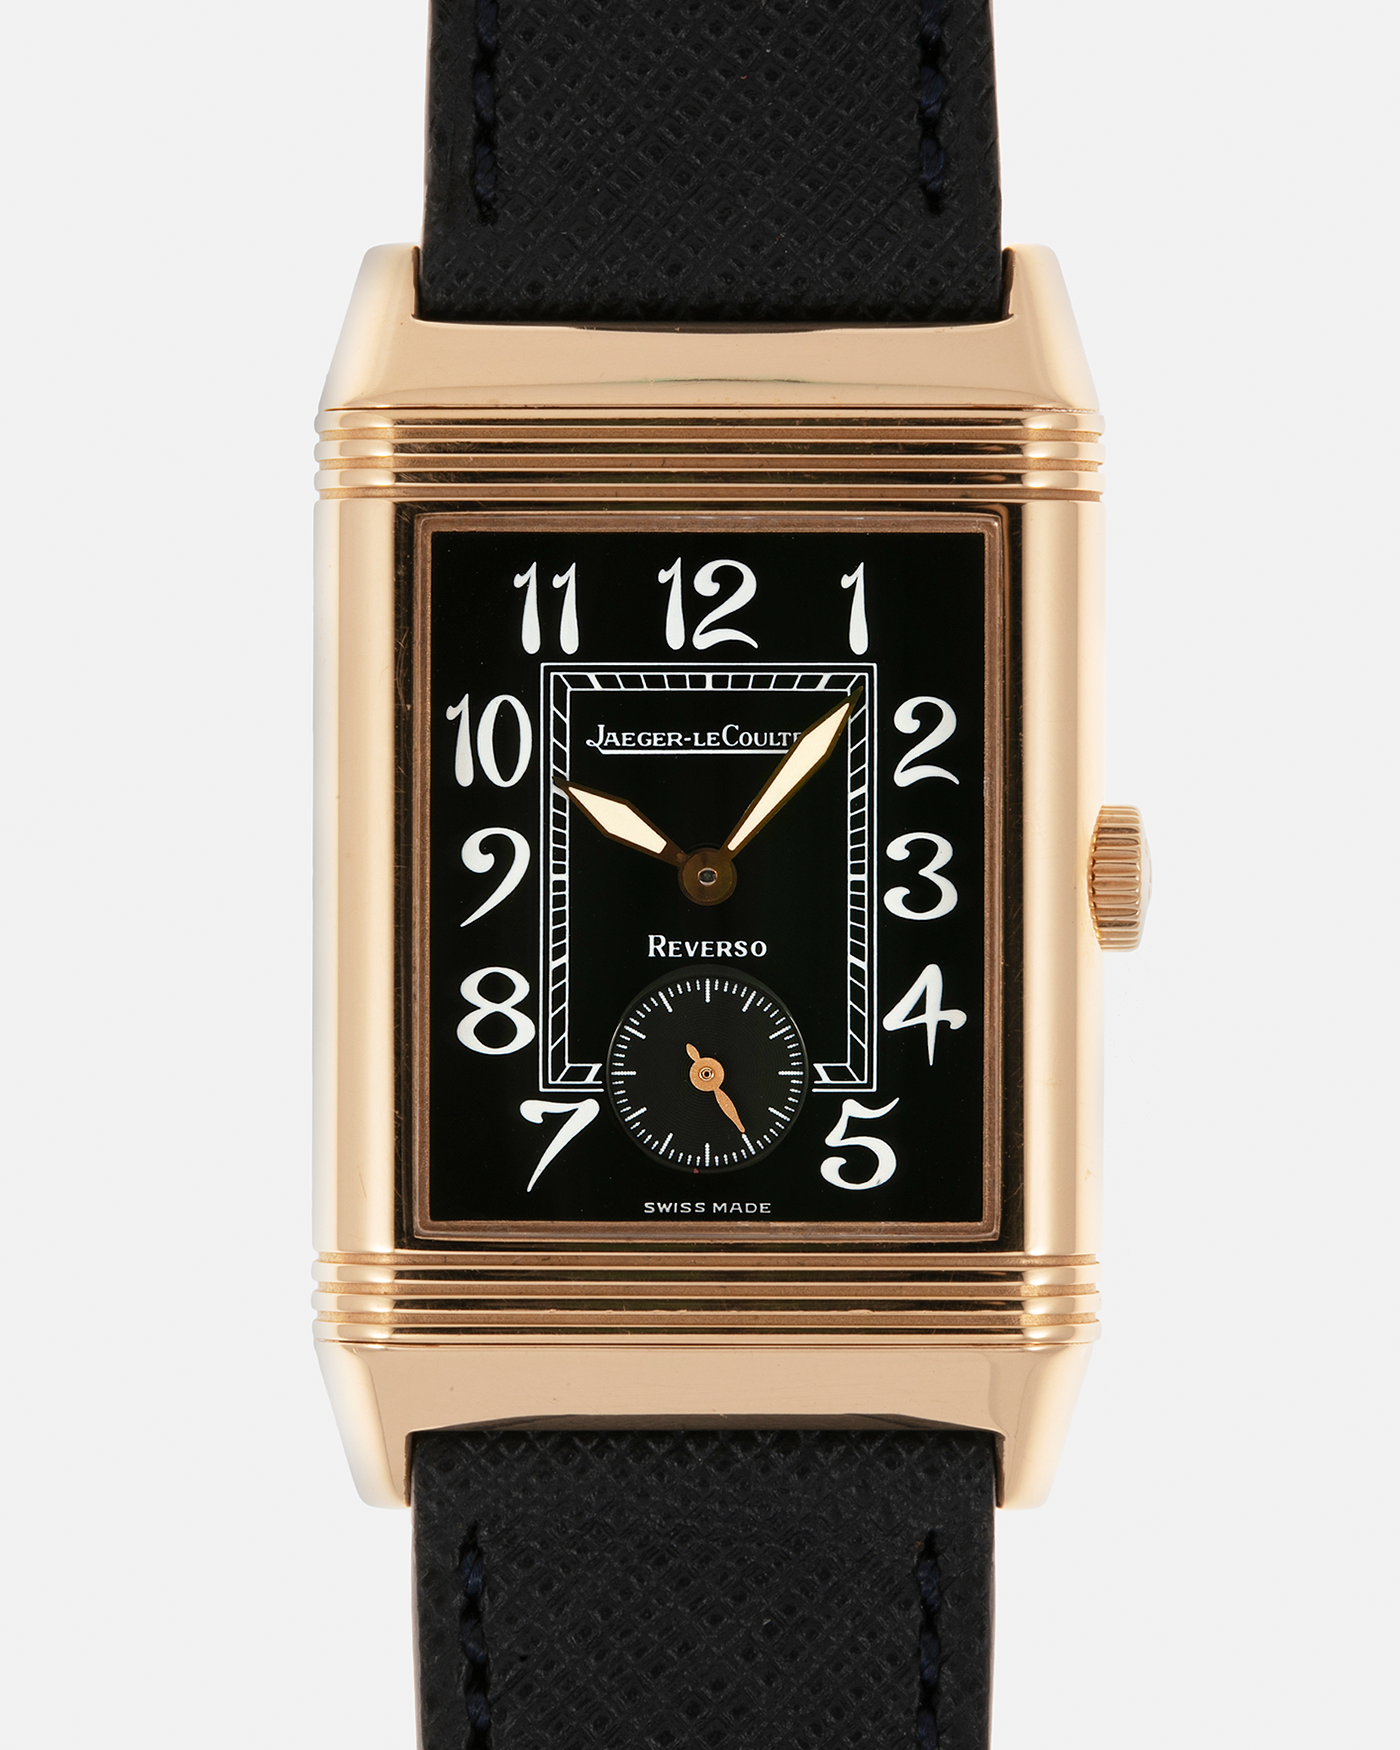 Brand: Jaeger LeCoultre Year: 2010s Model: Reverso Grand Taille ‘Art Deco‘ Reference: 270.2.62 Material: 18-carat Rose Gold Movement: Jaeger LeCoultre Cal. 822, Manual-Wind Case Diameter: 42mm x 26mm x 9.5mm Lug Width: 19mm Strap: Molequin Oxford Blue Textured Calf Leather Strap with Signed 18-carat Rose Gold Deployant Clasp